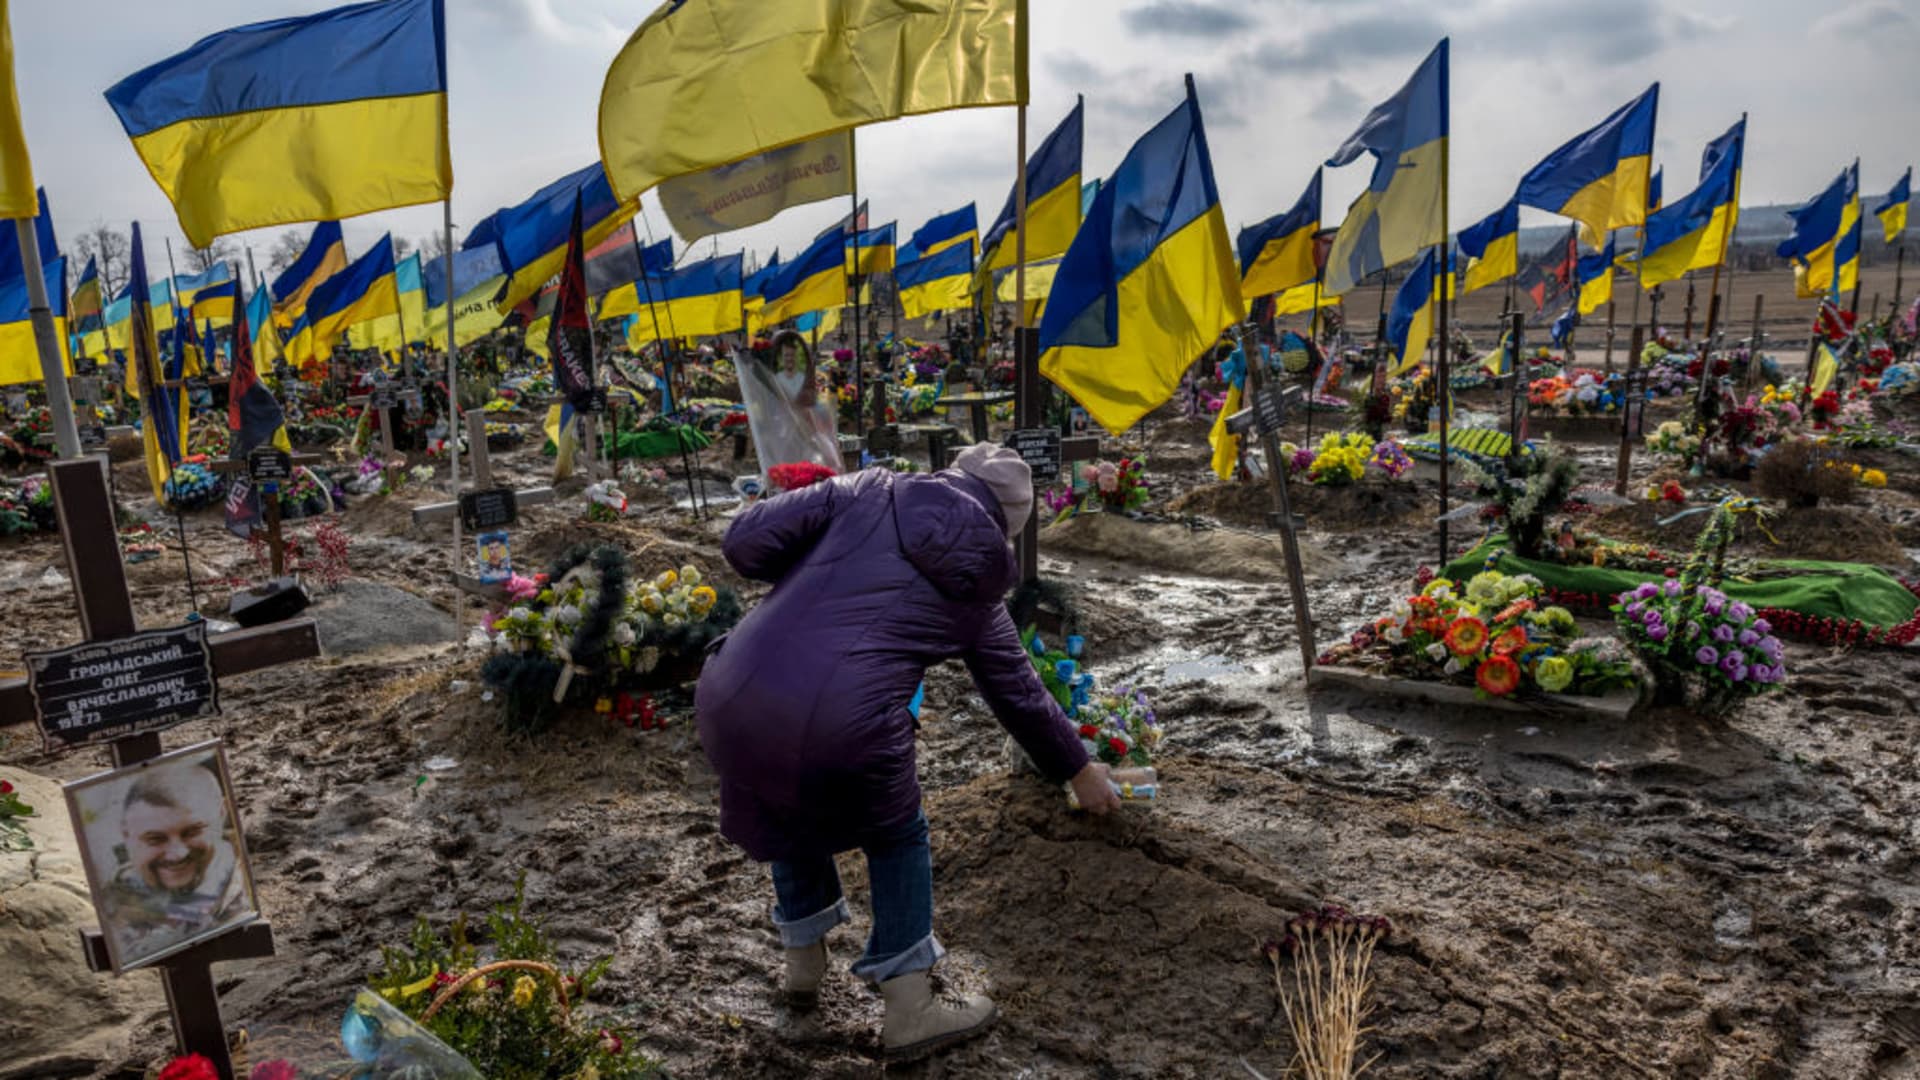 A woman places a container of food atop the grave of her son in the soldier's section of a cemetery on March 07, 2023 in Kharkiv, Ukraine. Last February, Russia's military invaded Ukraine from three sides and launched airstrikes across the country.